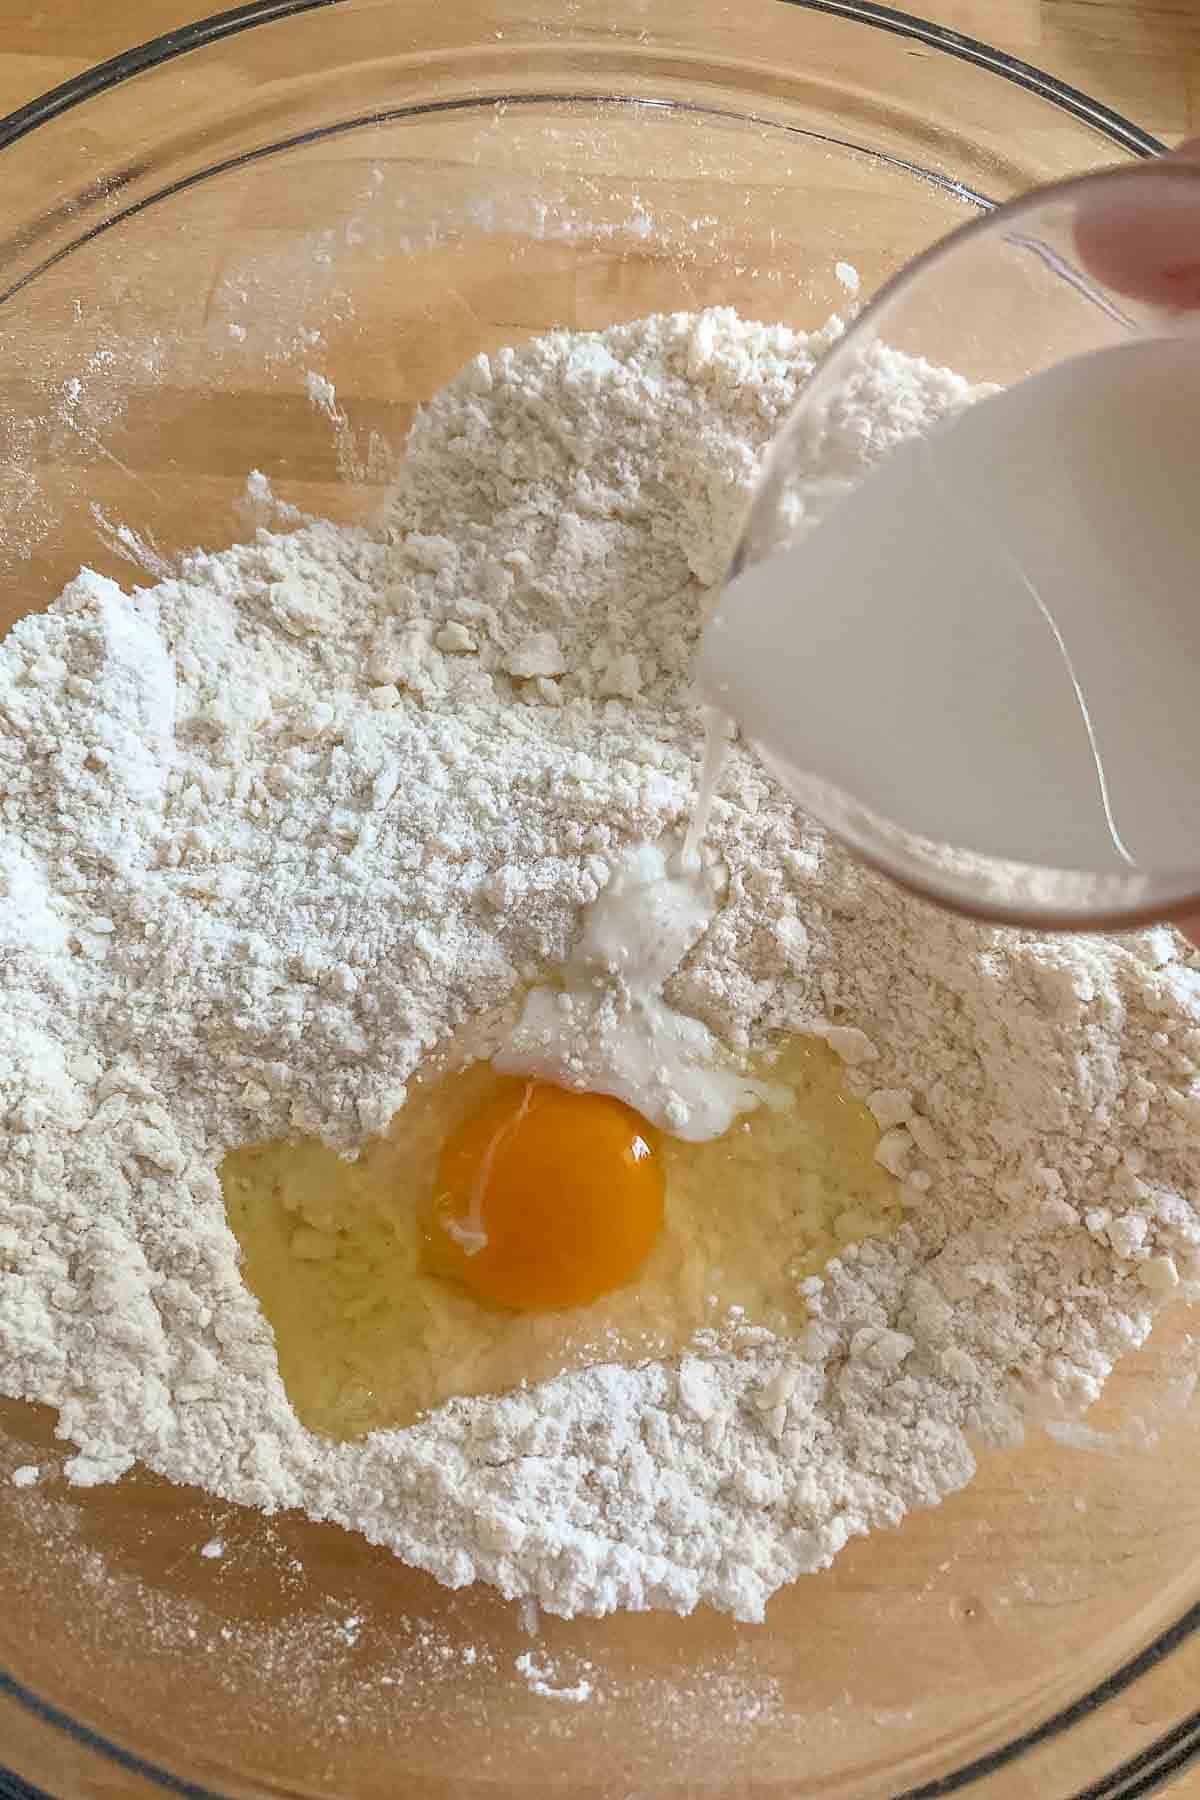 Adding milk and egg to empanada dough ingredients in a glass bowl.